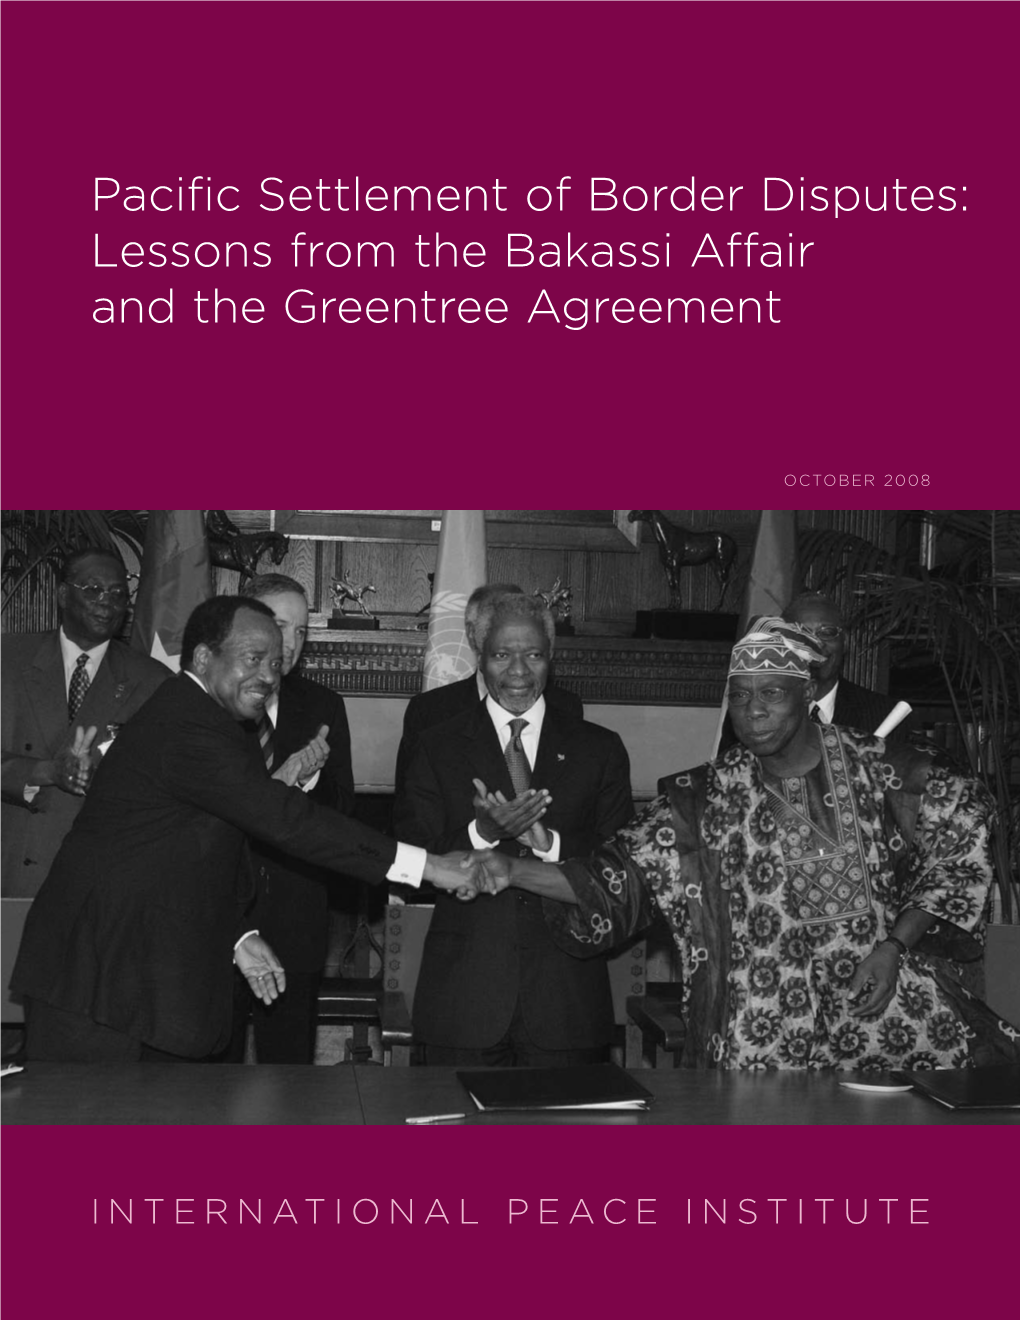 Pacific Settlement of Border Disputes: Lessons from the Bakassi Affair and the Greentree Agreement